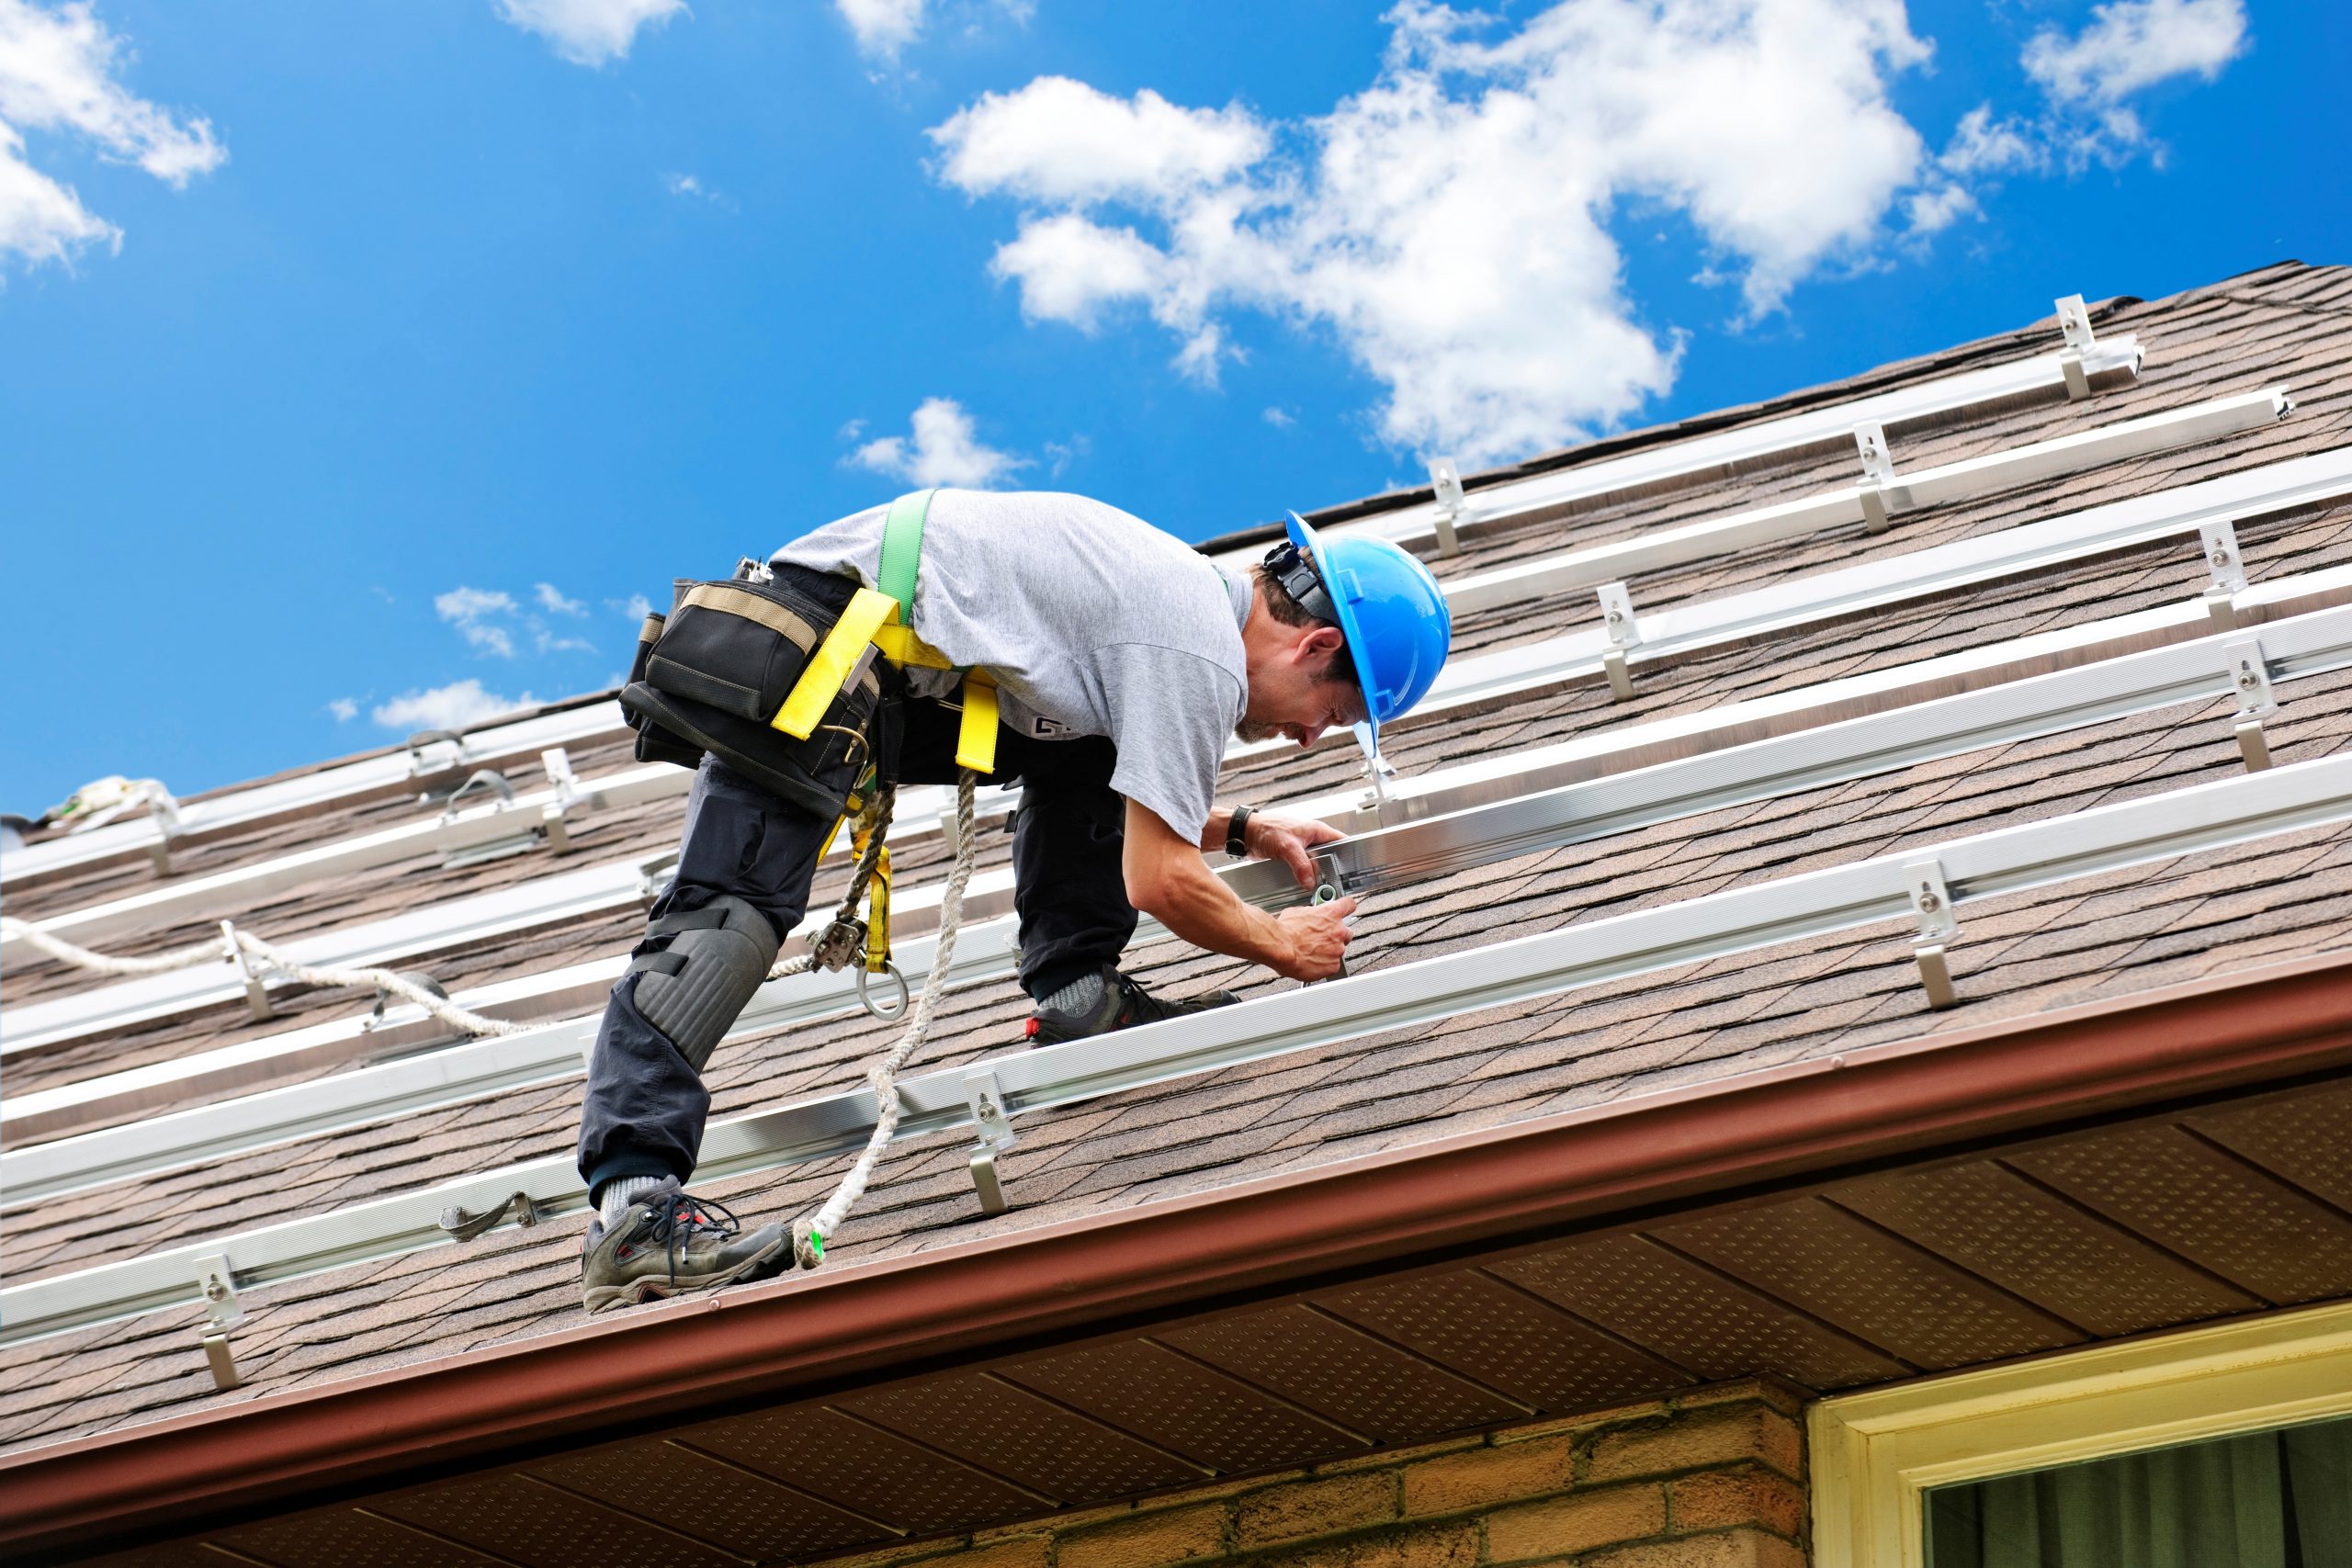 7 Things to Consider When Choosing a Roofing Company